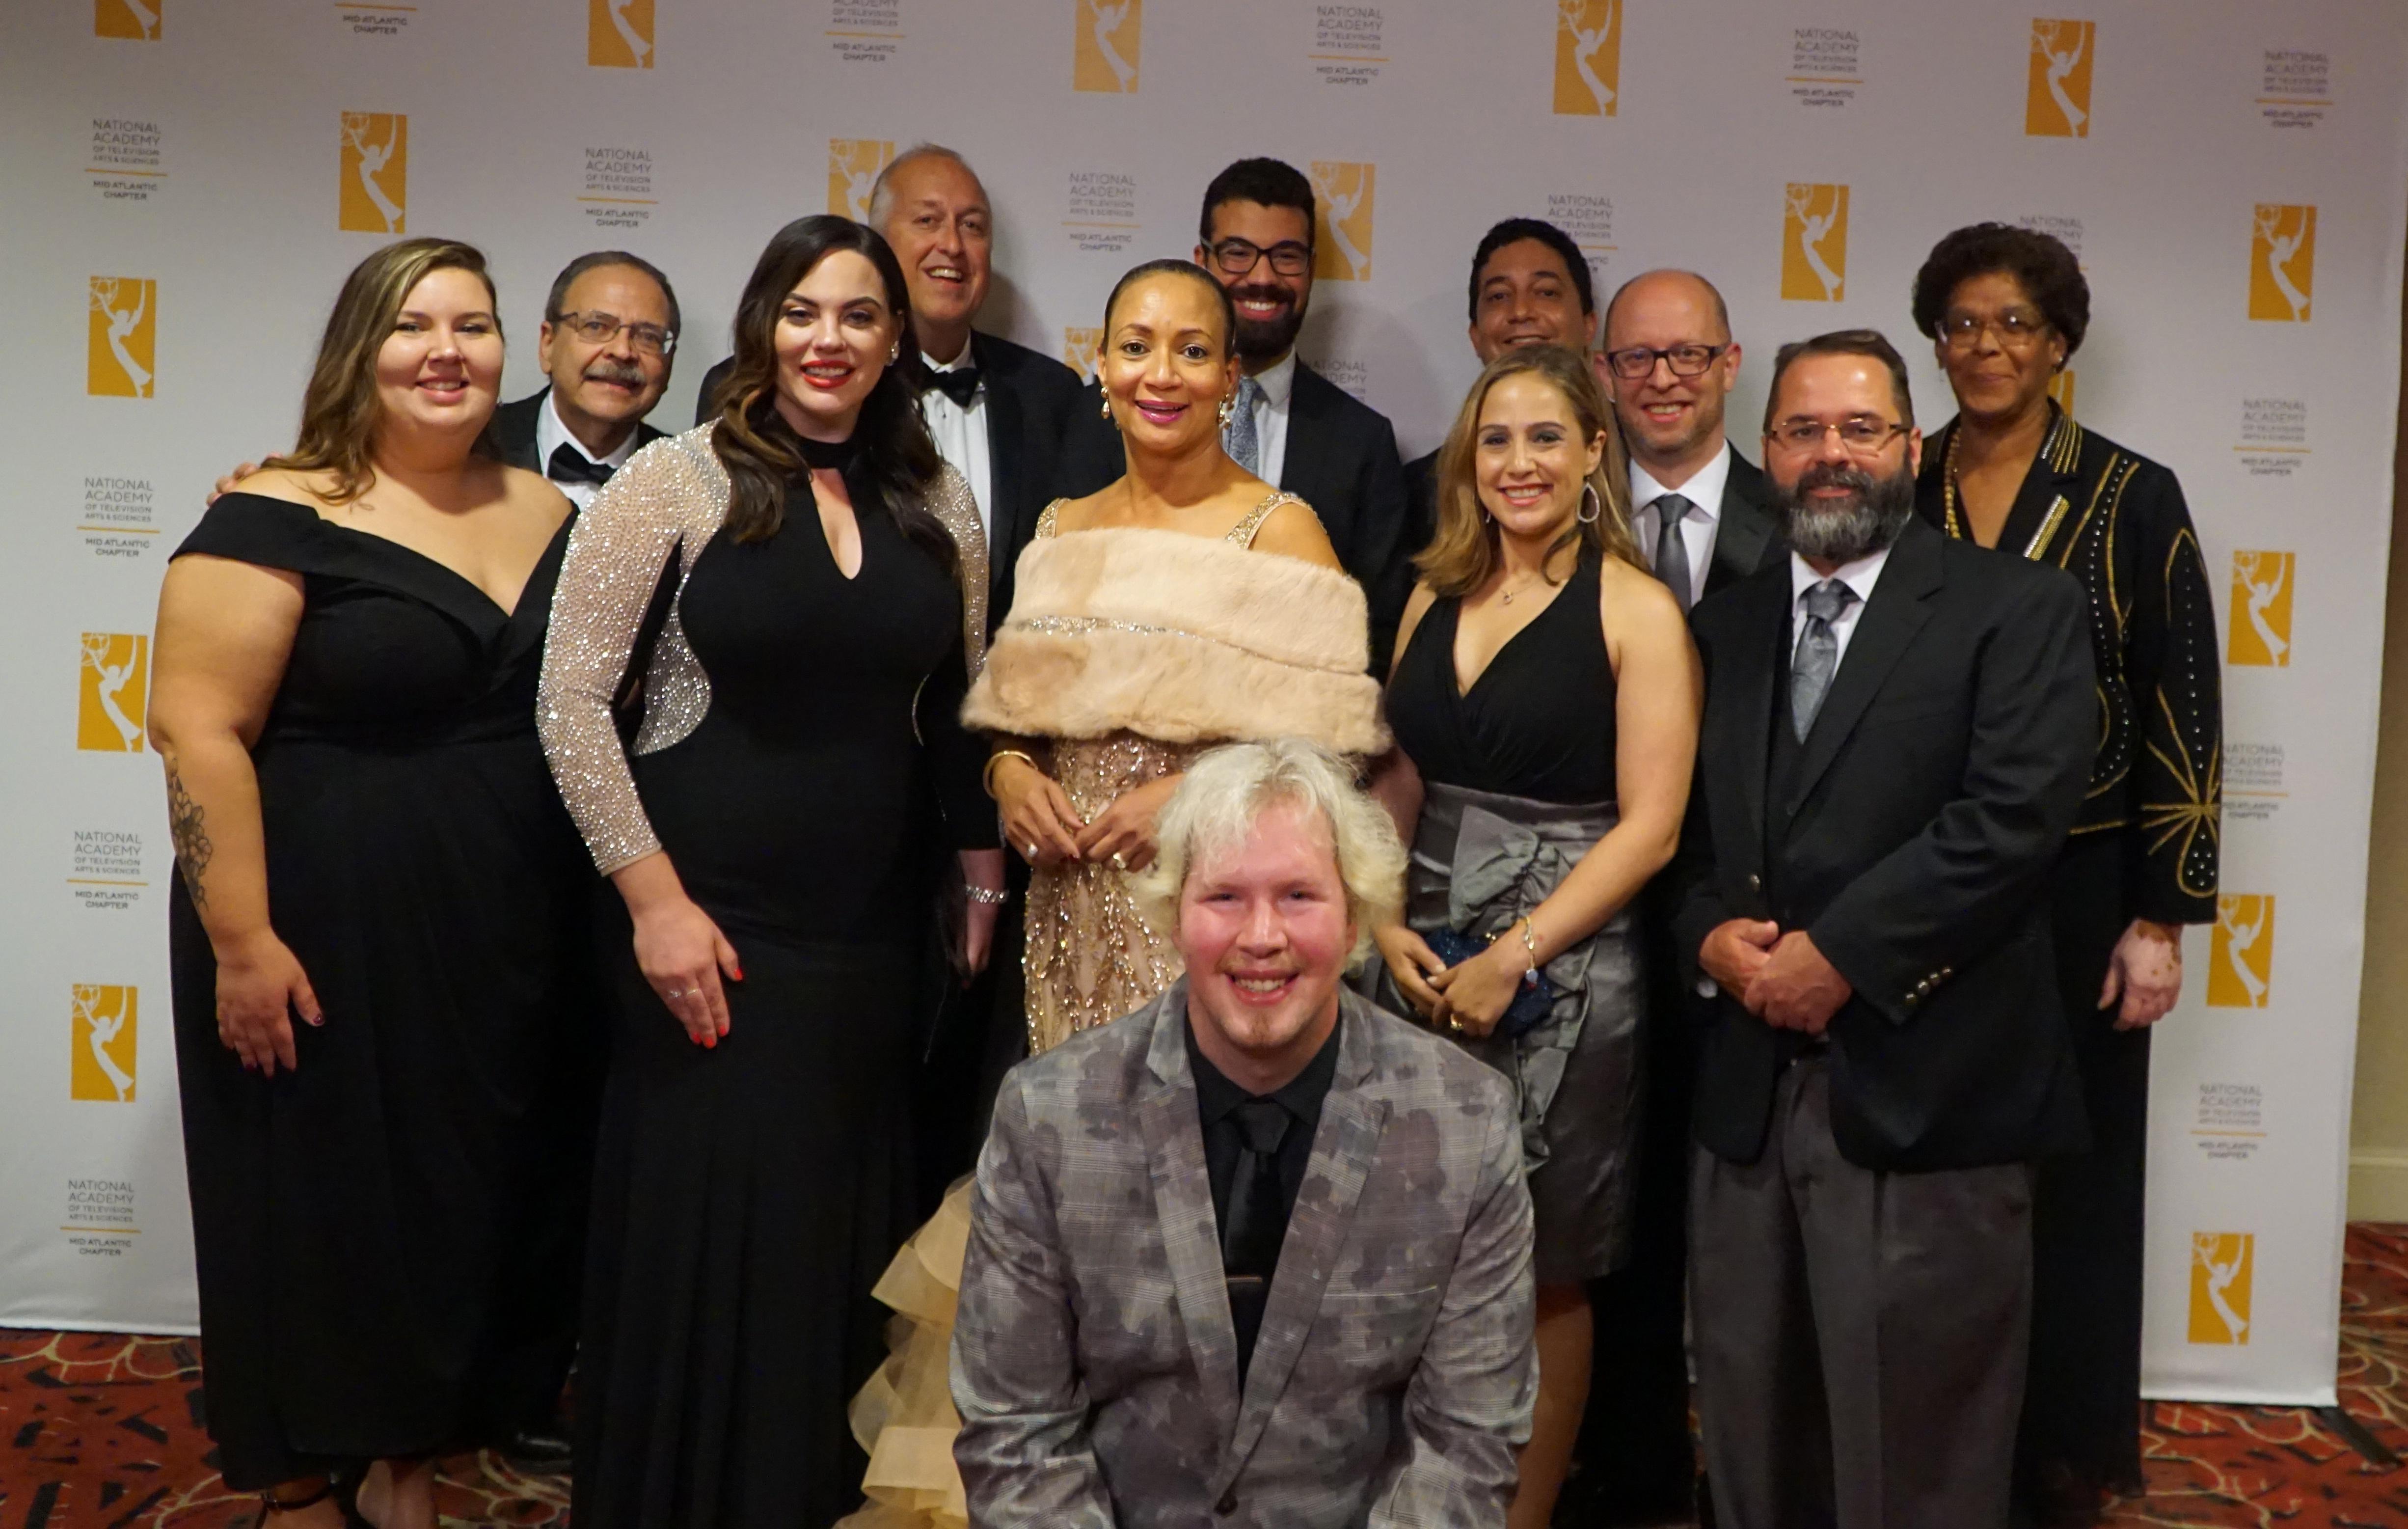 PBS39 Team Members Attend the 2019 Mid-Atlantic Emmy Awards